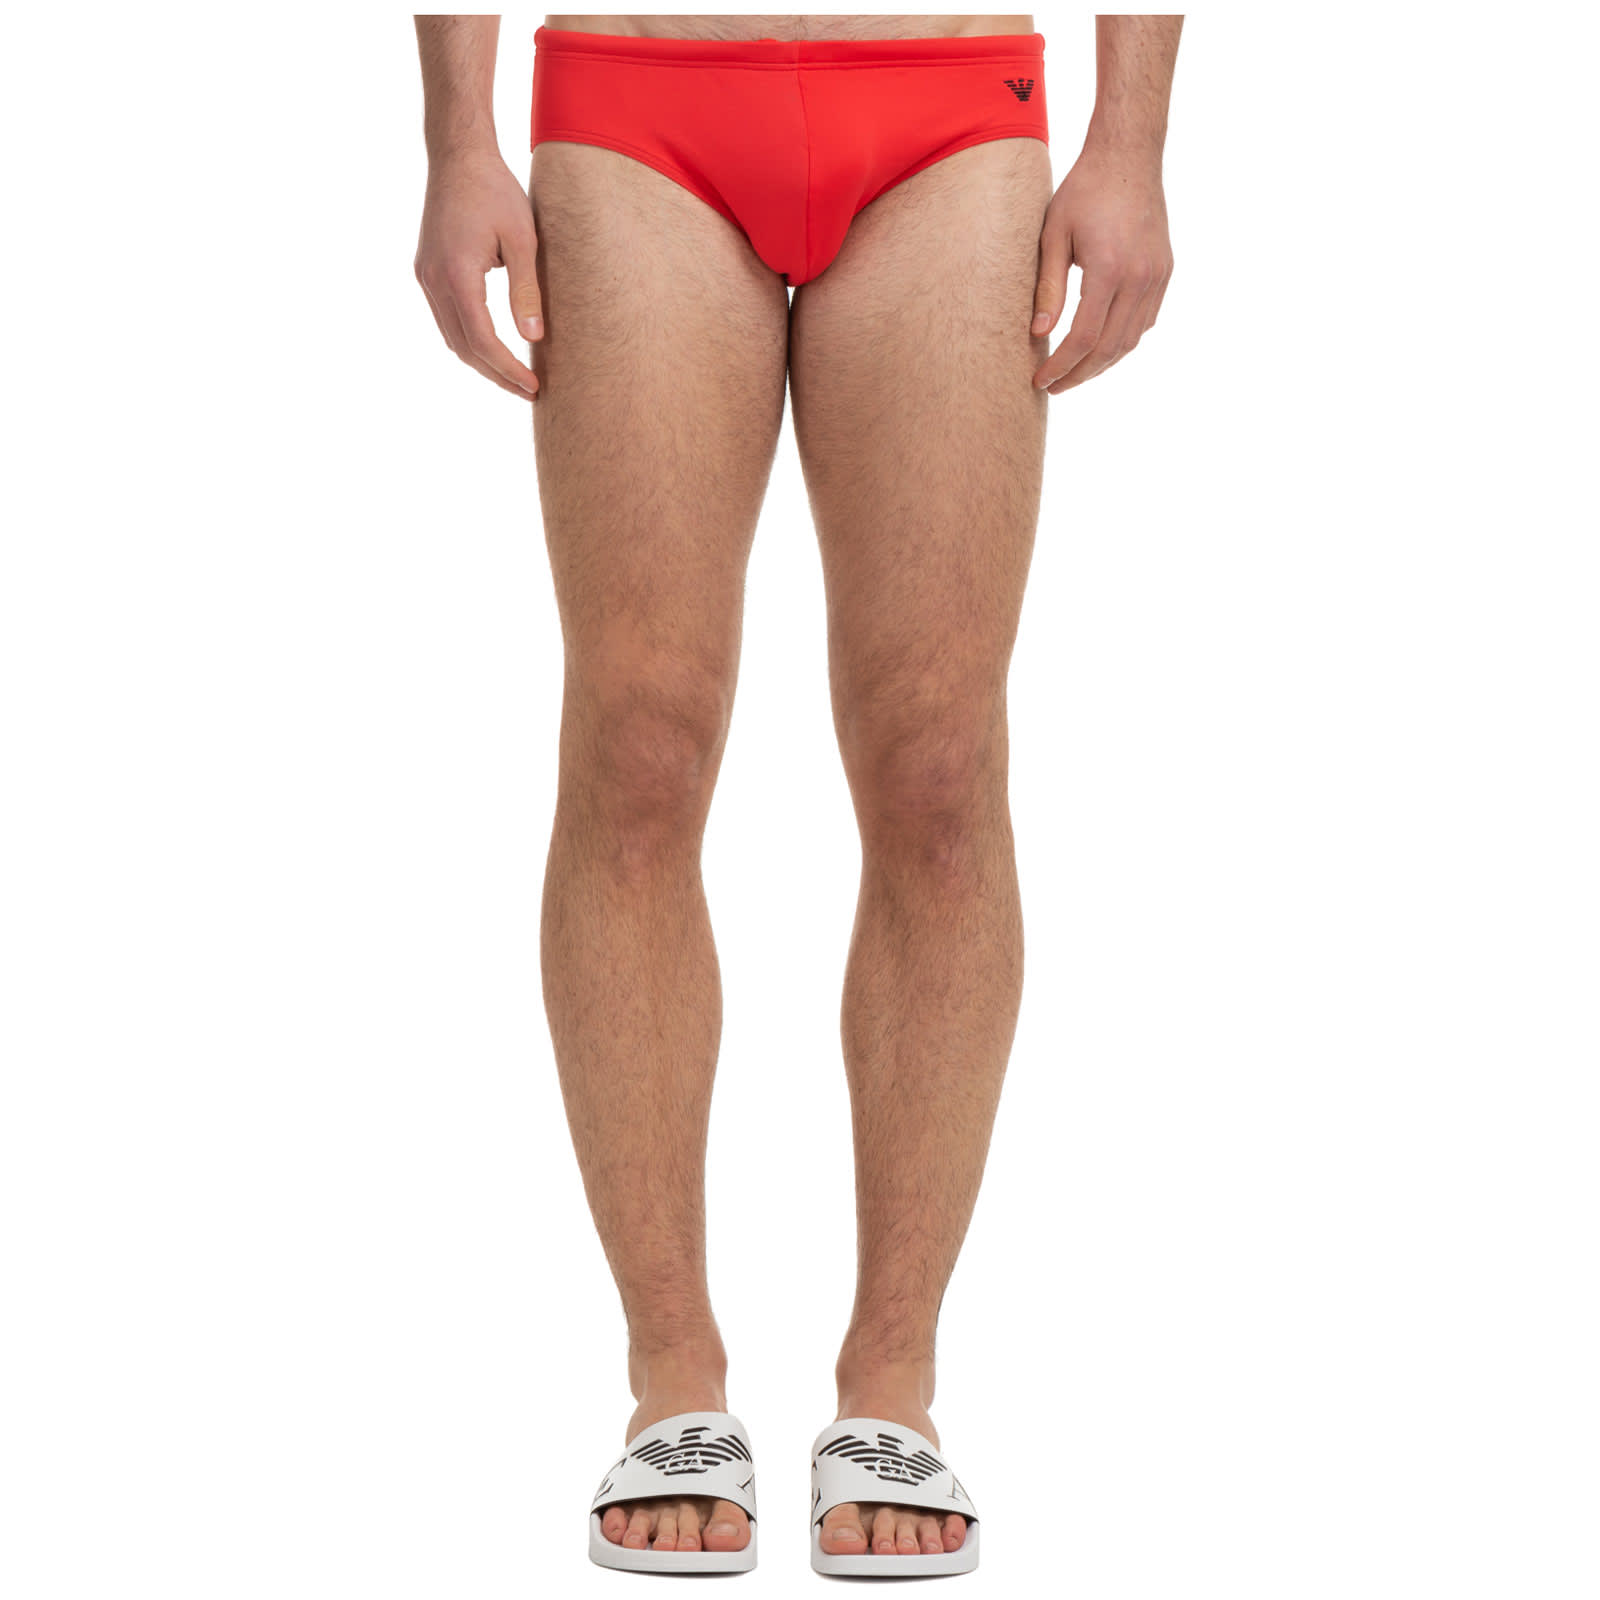 Emporio Armani Men's Brief Swimsuit Bathing Trunks Swimming Suit In Red